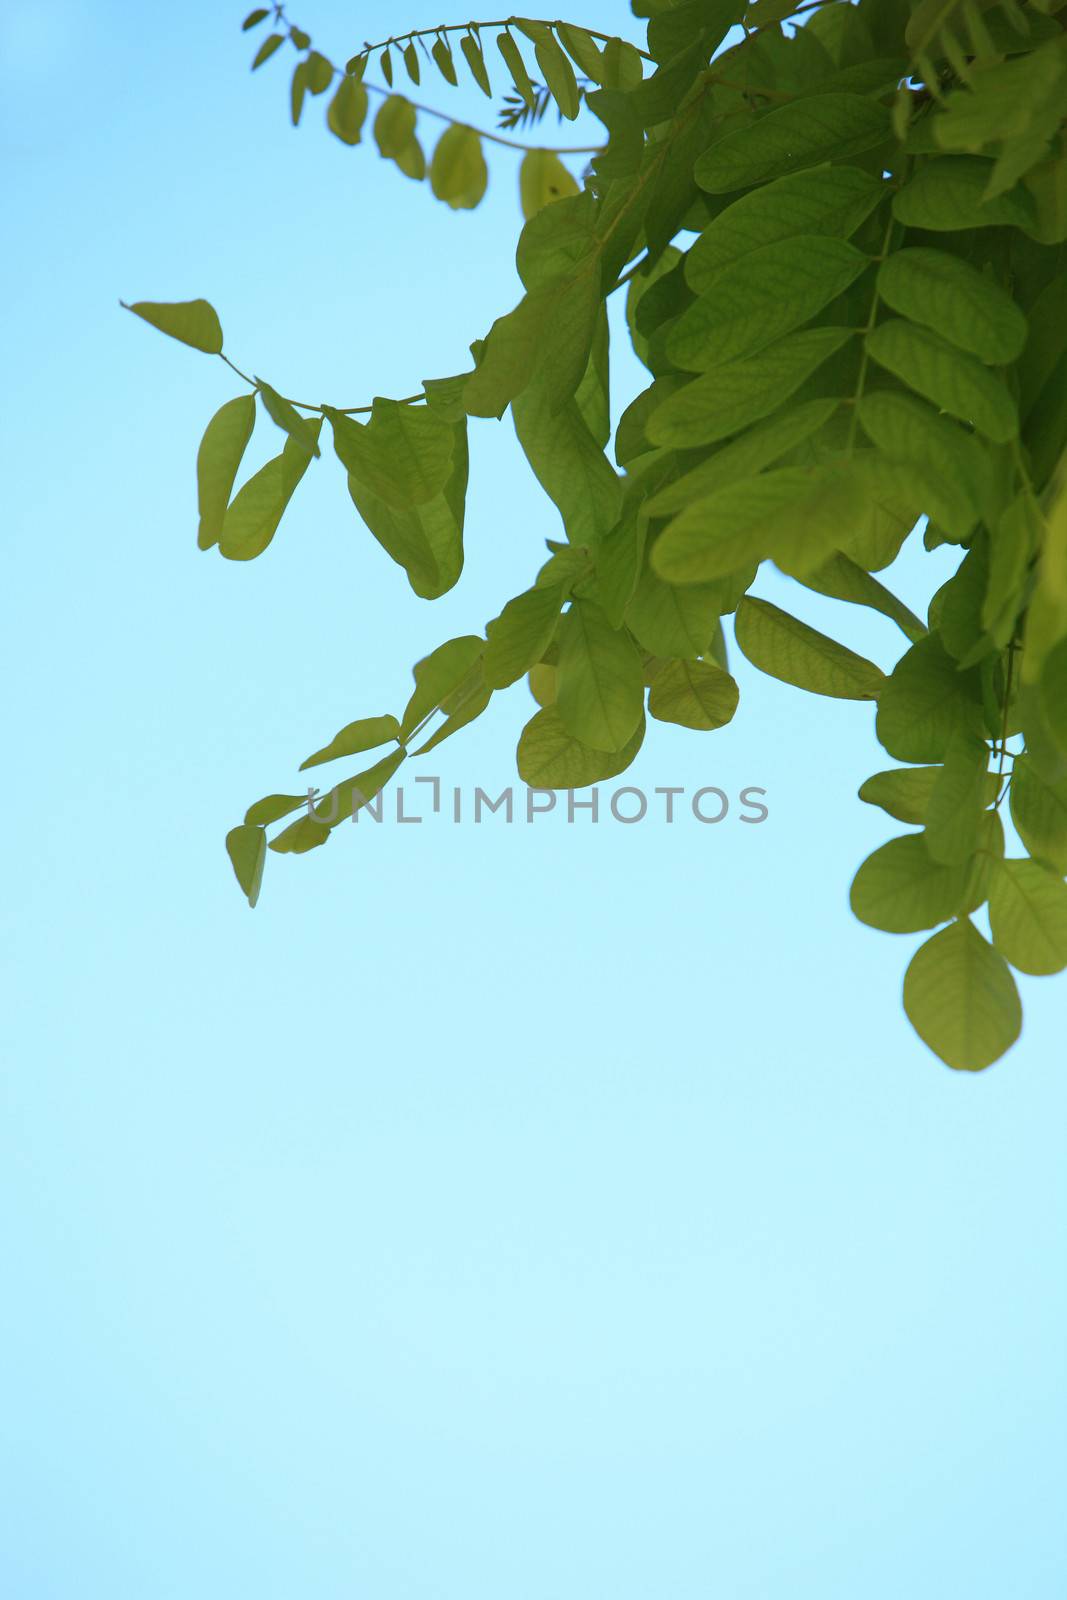 Green leaves against a blue sky by Farina6000